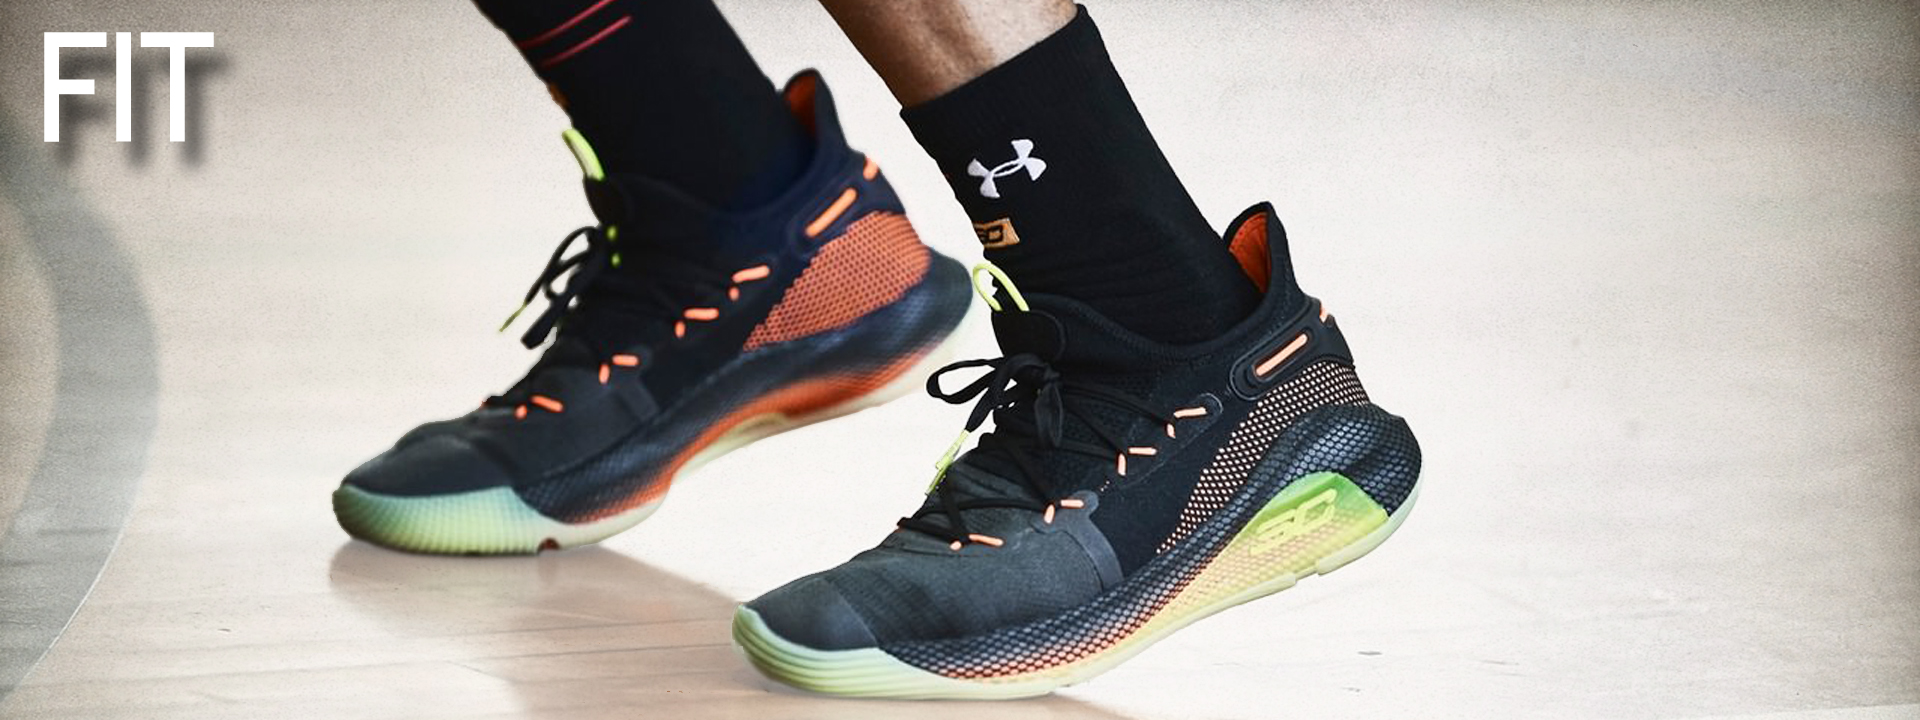 under armour basketball shoes curry 6